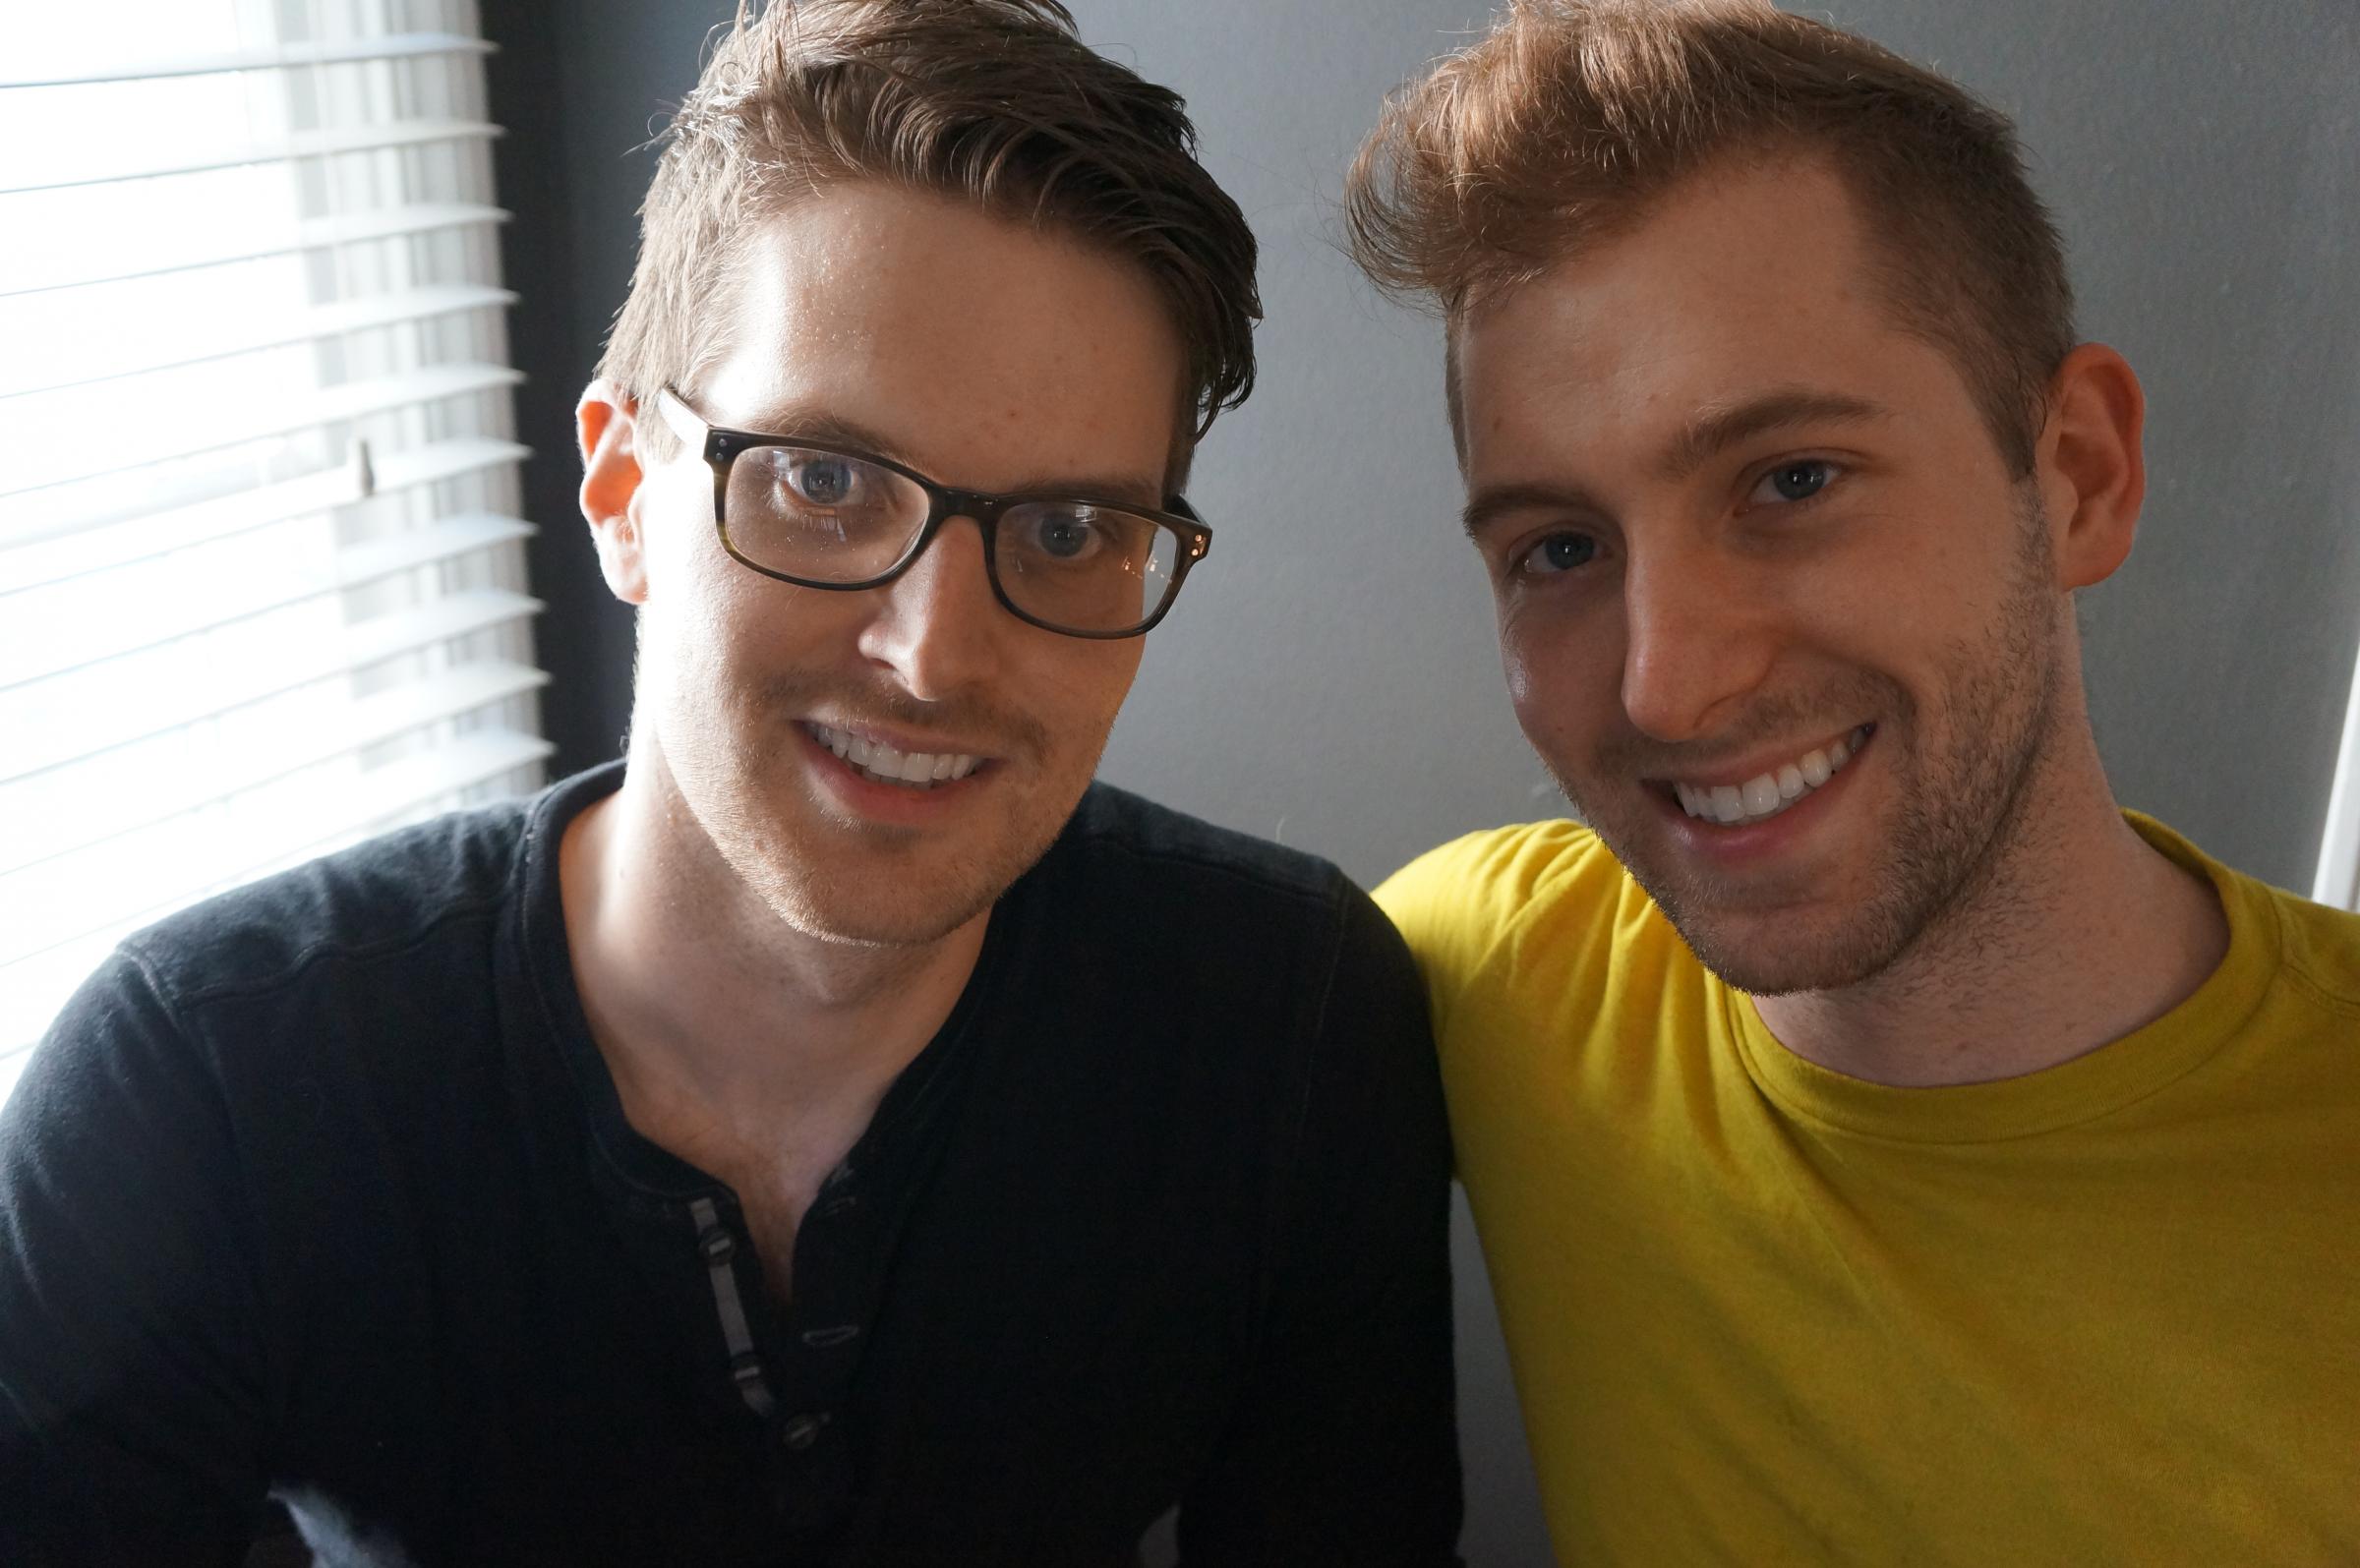 Paul Holland (left) and Austin Ashley (right) plan a commitment ceremony in September before headed to New York to be formally married. - GayMarriage0730-Foto